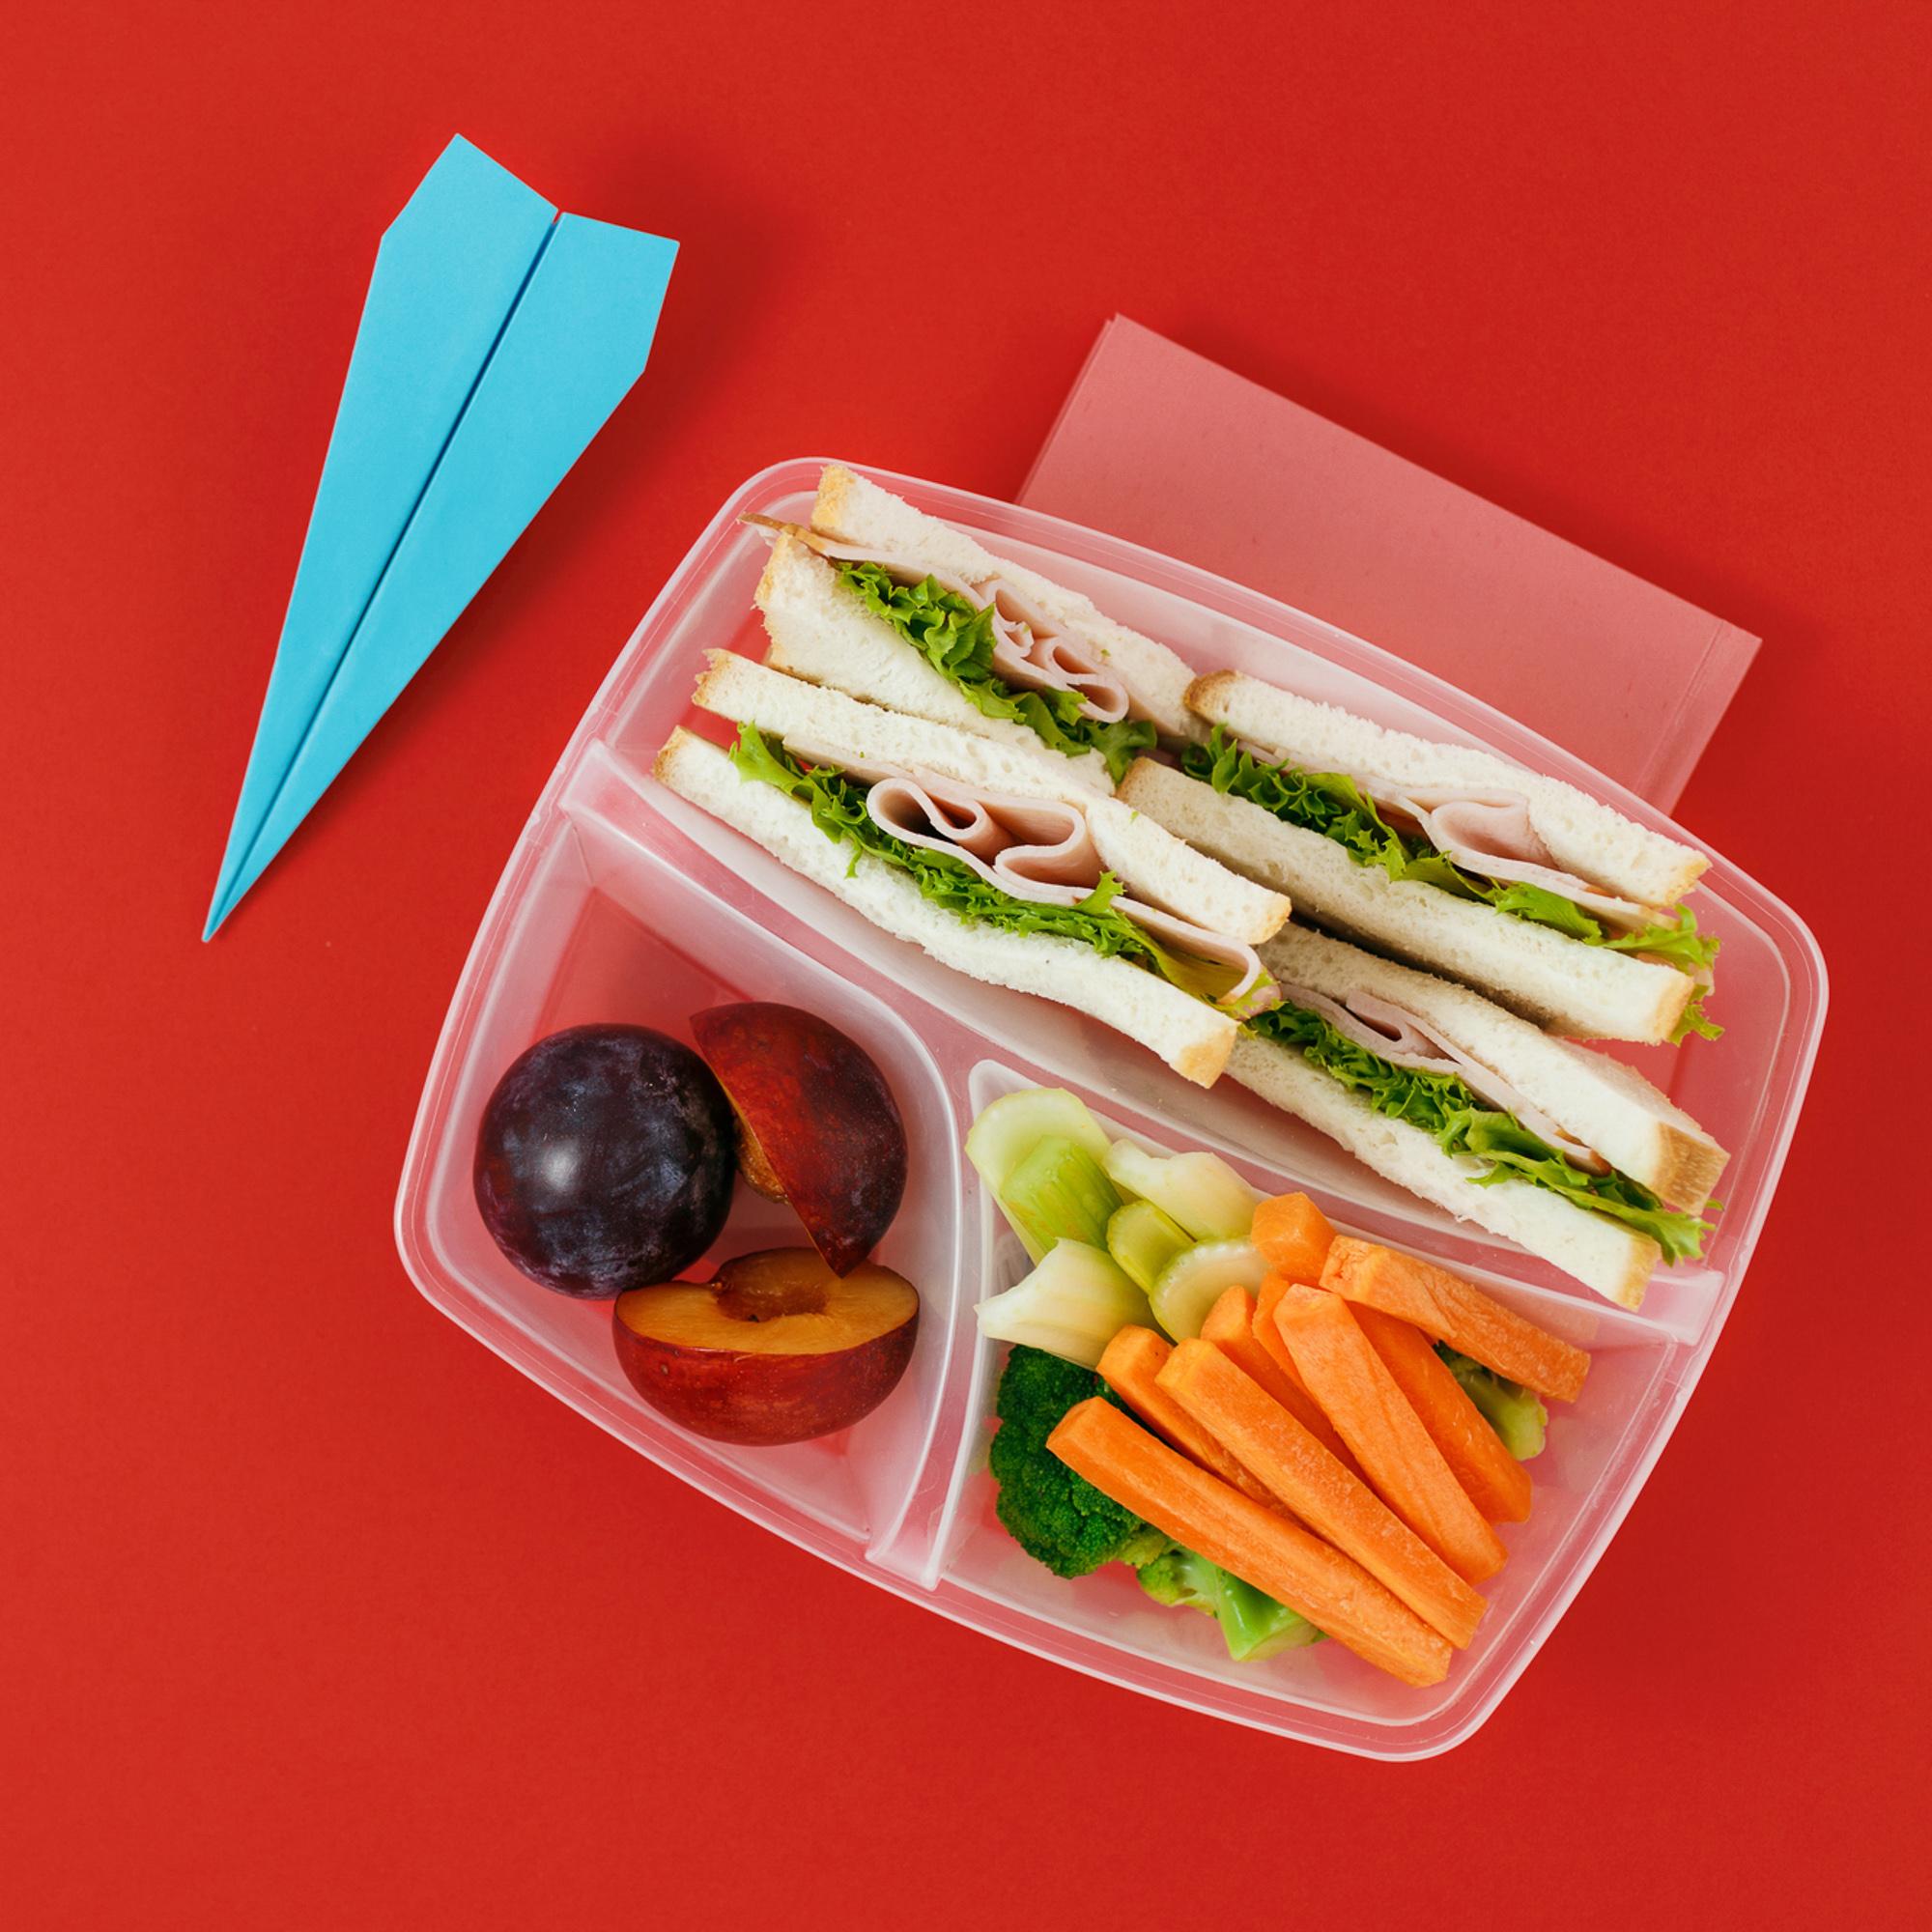 5 brilliant DIY travel snack ideas for kids that will save the day.